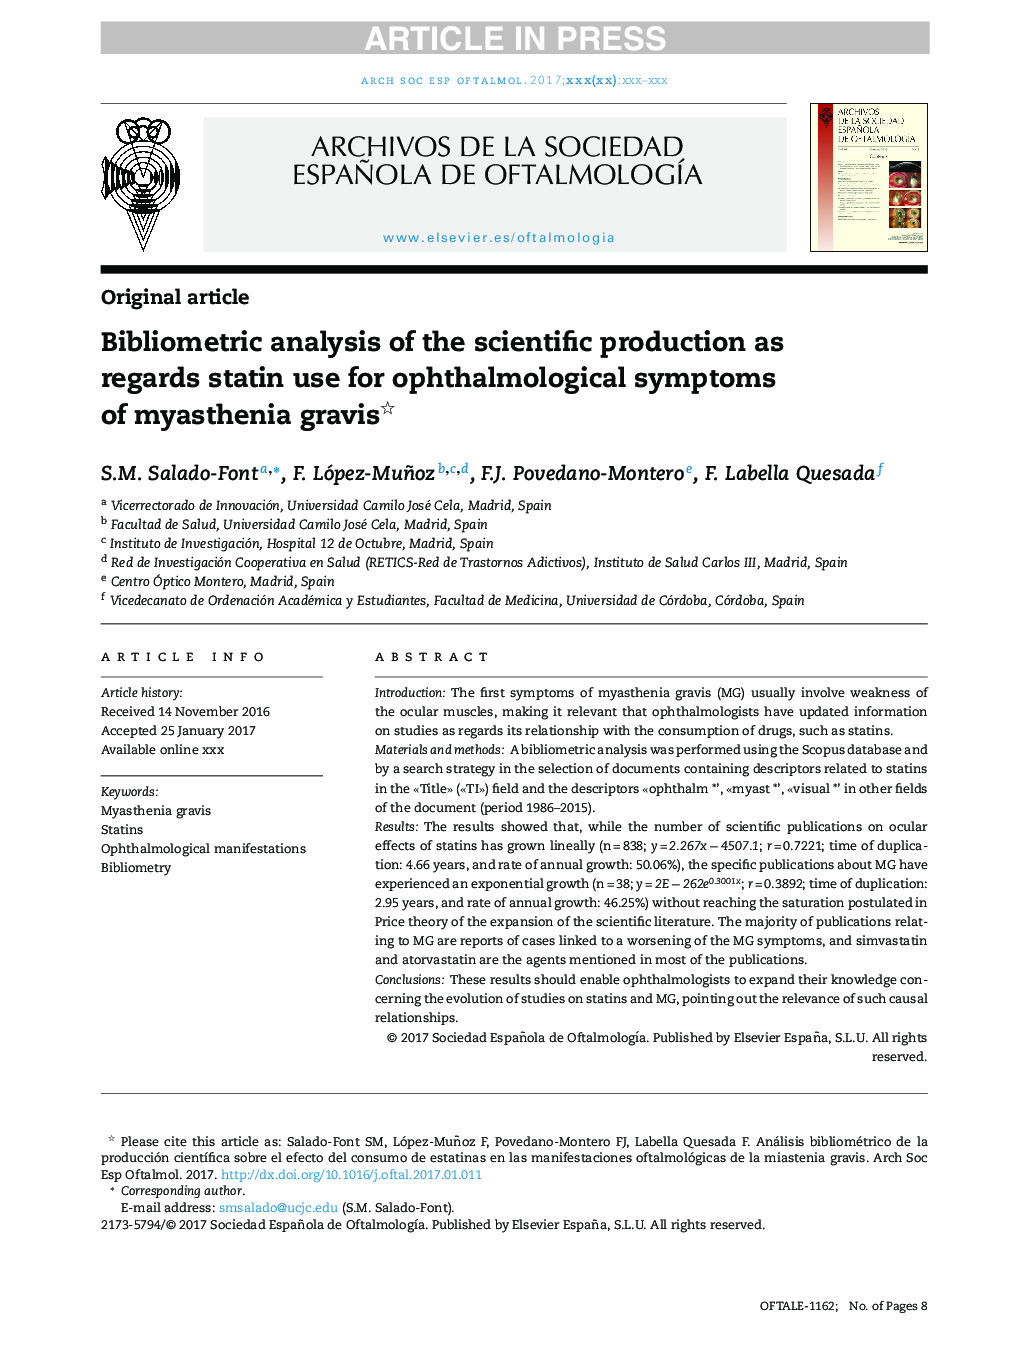 Bibliometric analysis of the scientific production as regards statin use for ophthalmological symptoms of myasthenia gravis